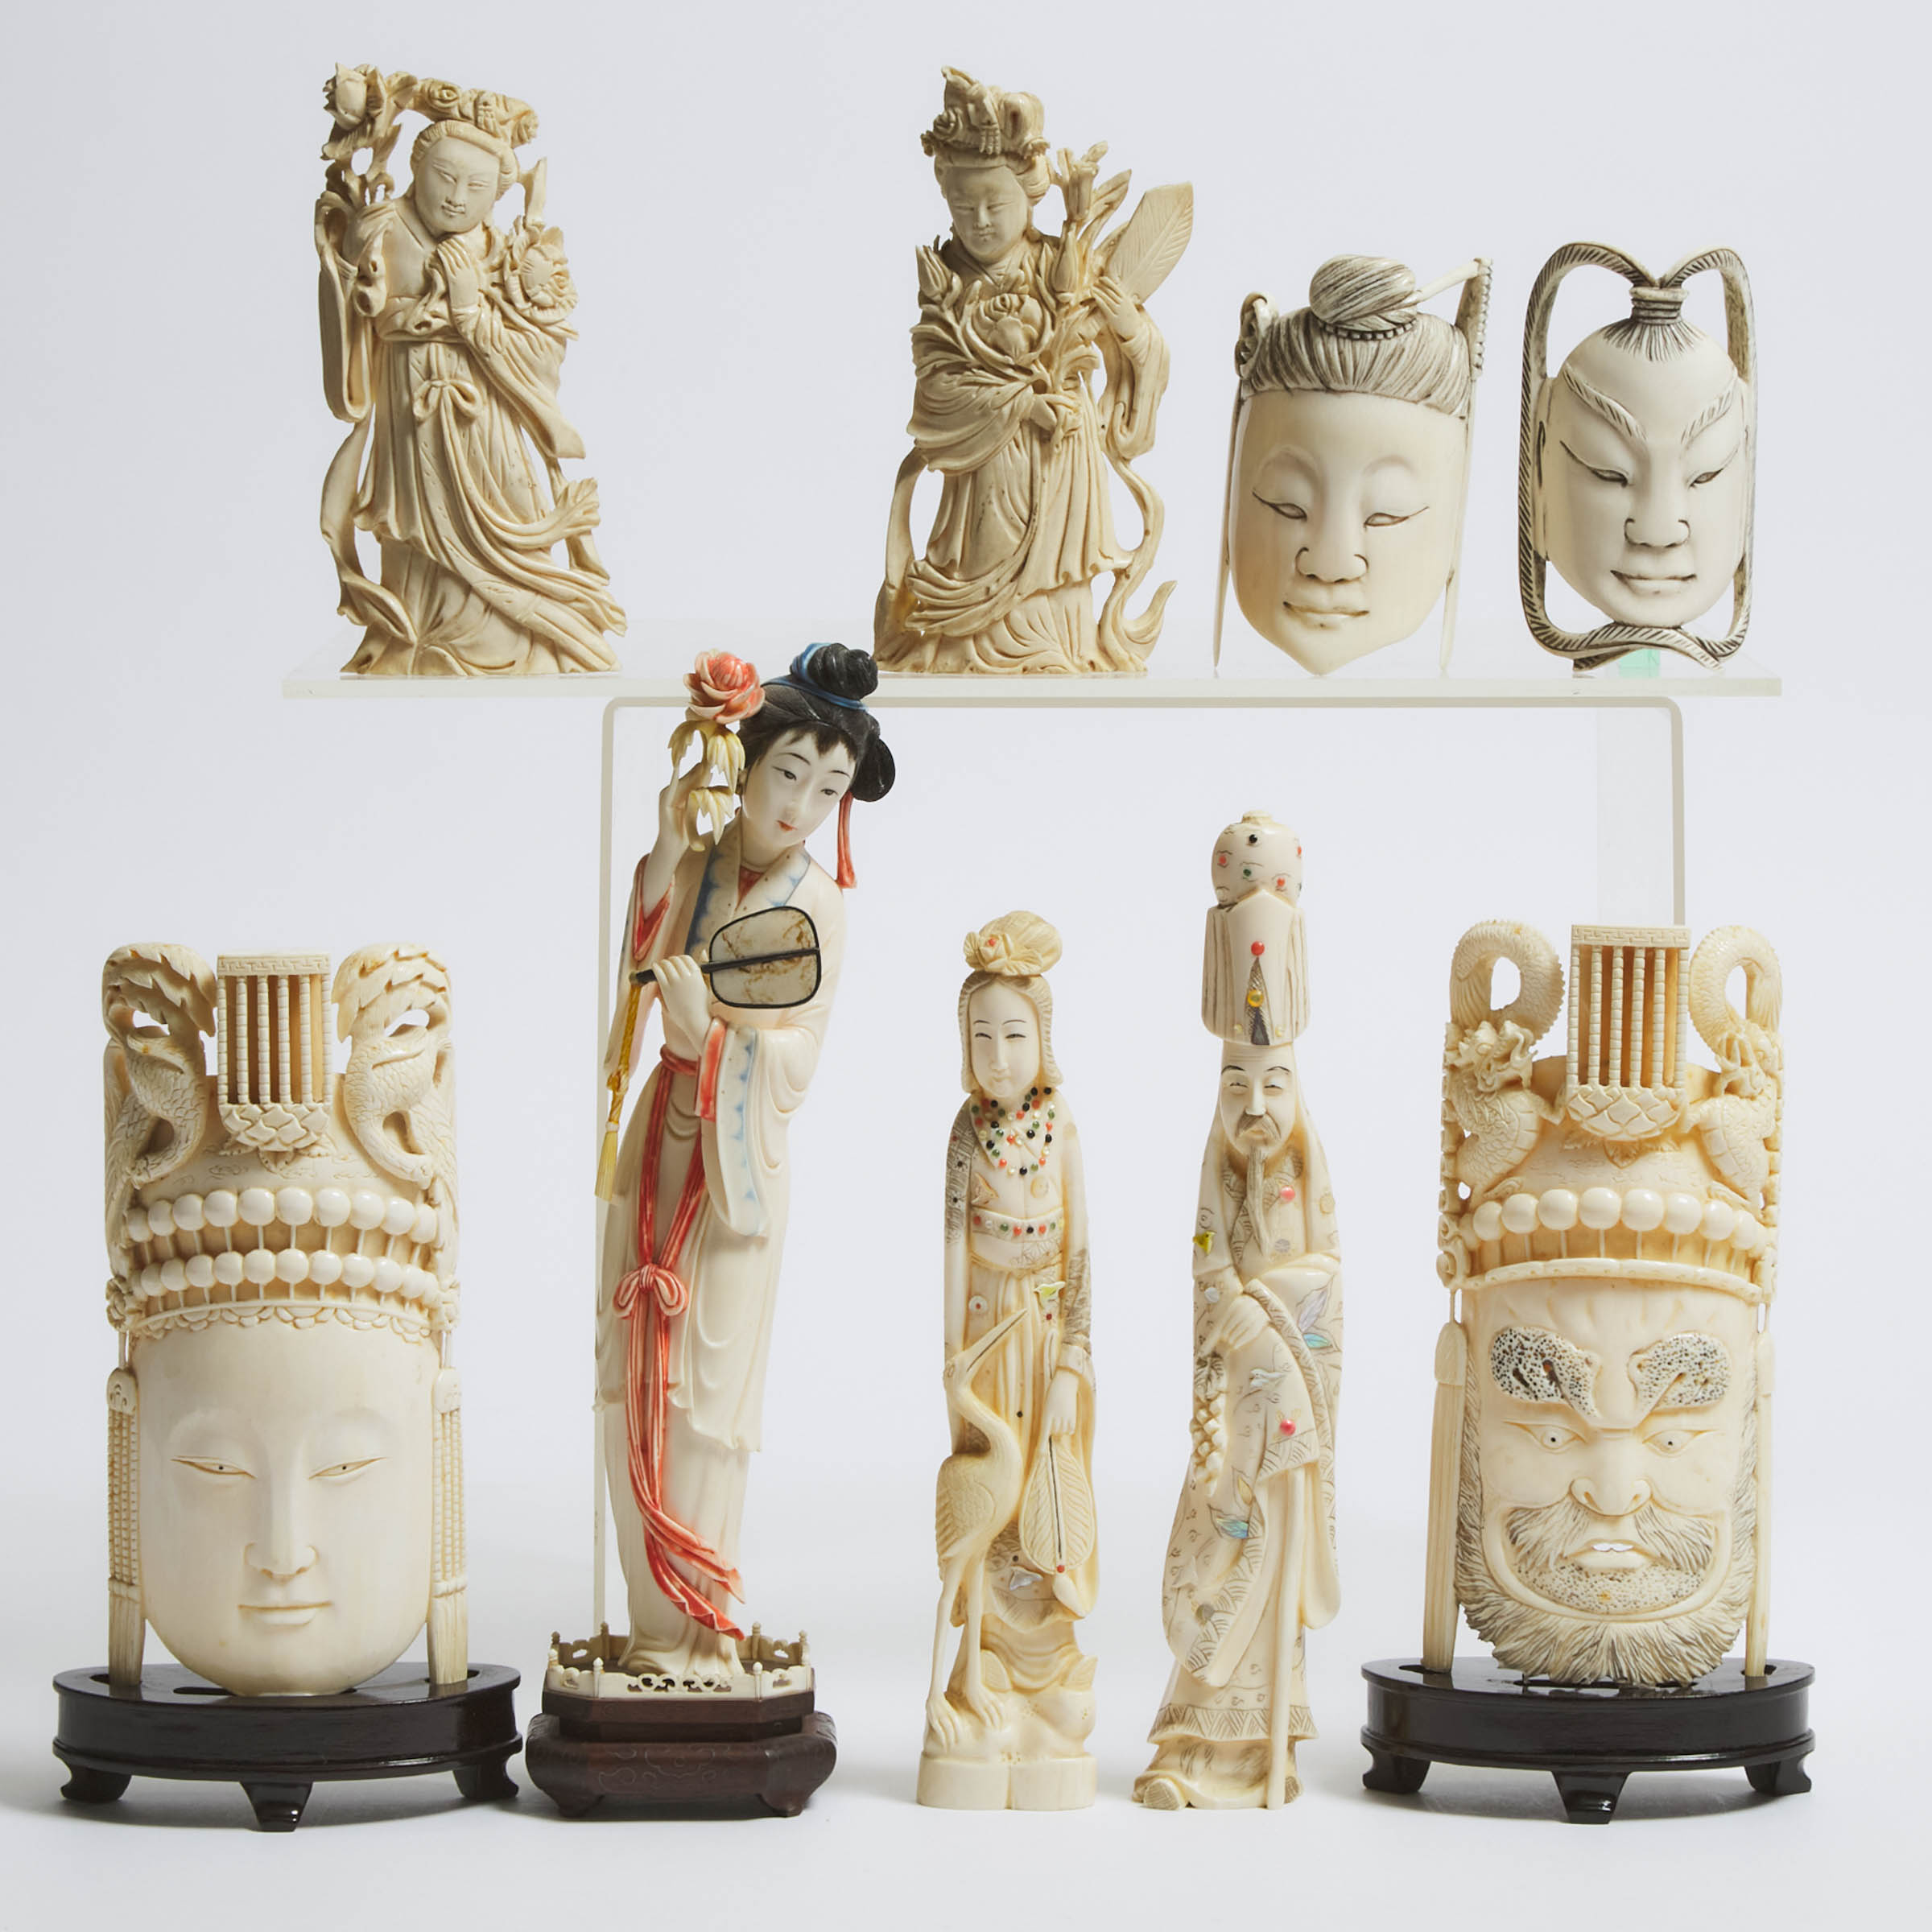 A Group of Nine Ivory Figures, Early 20th Century